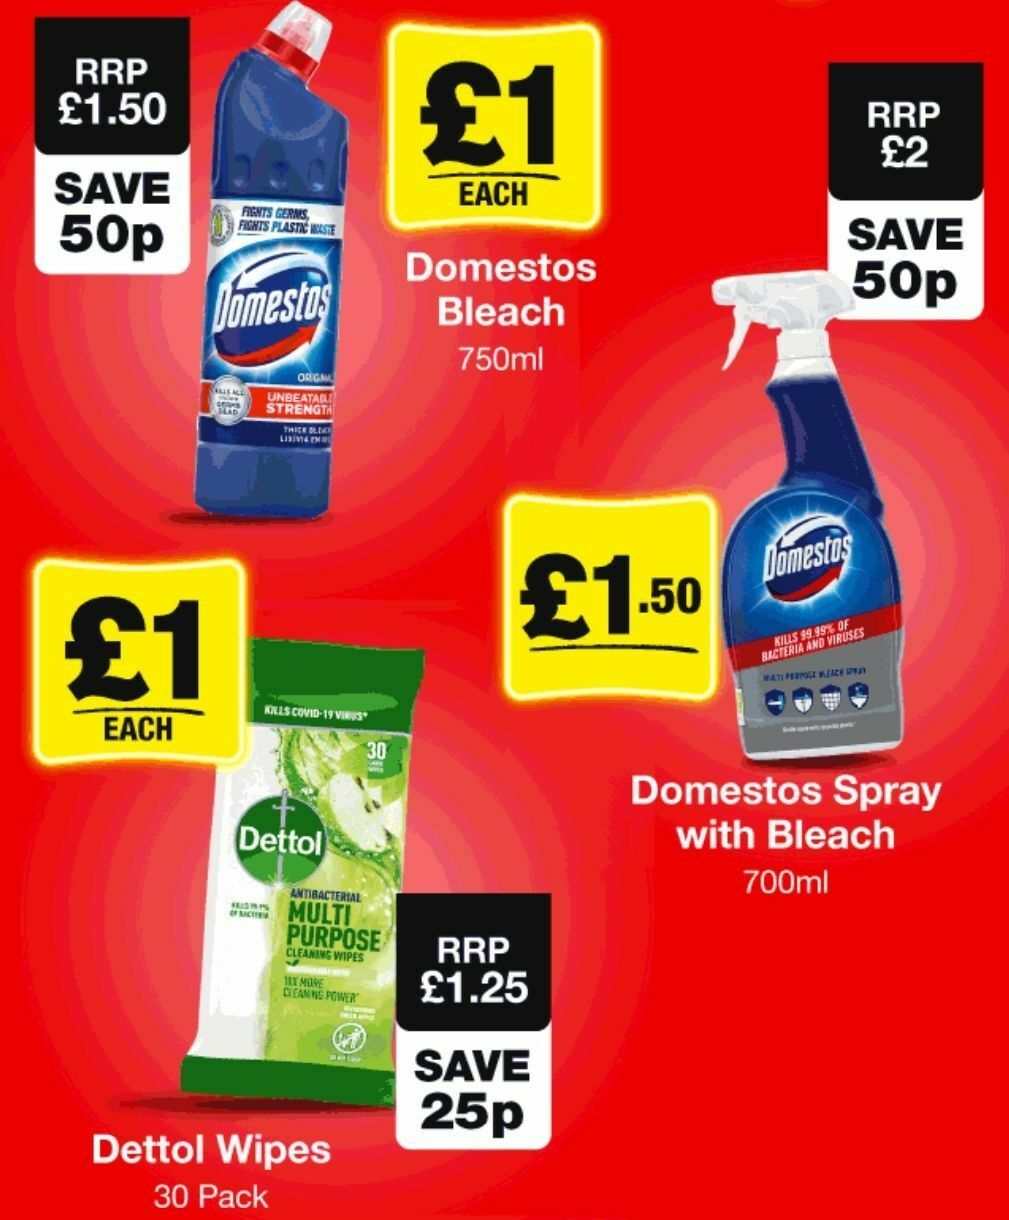 Poundland Offers from 14 August